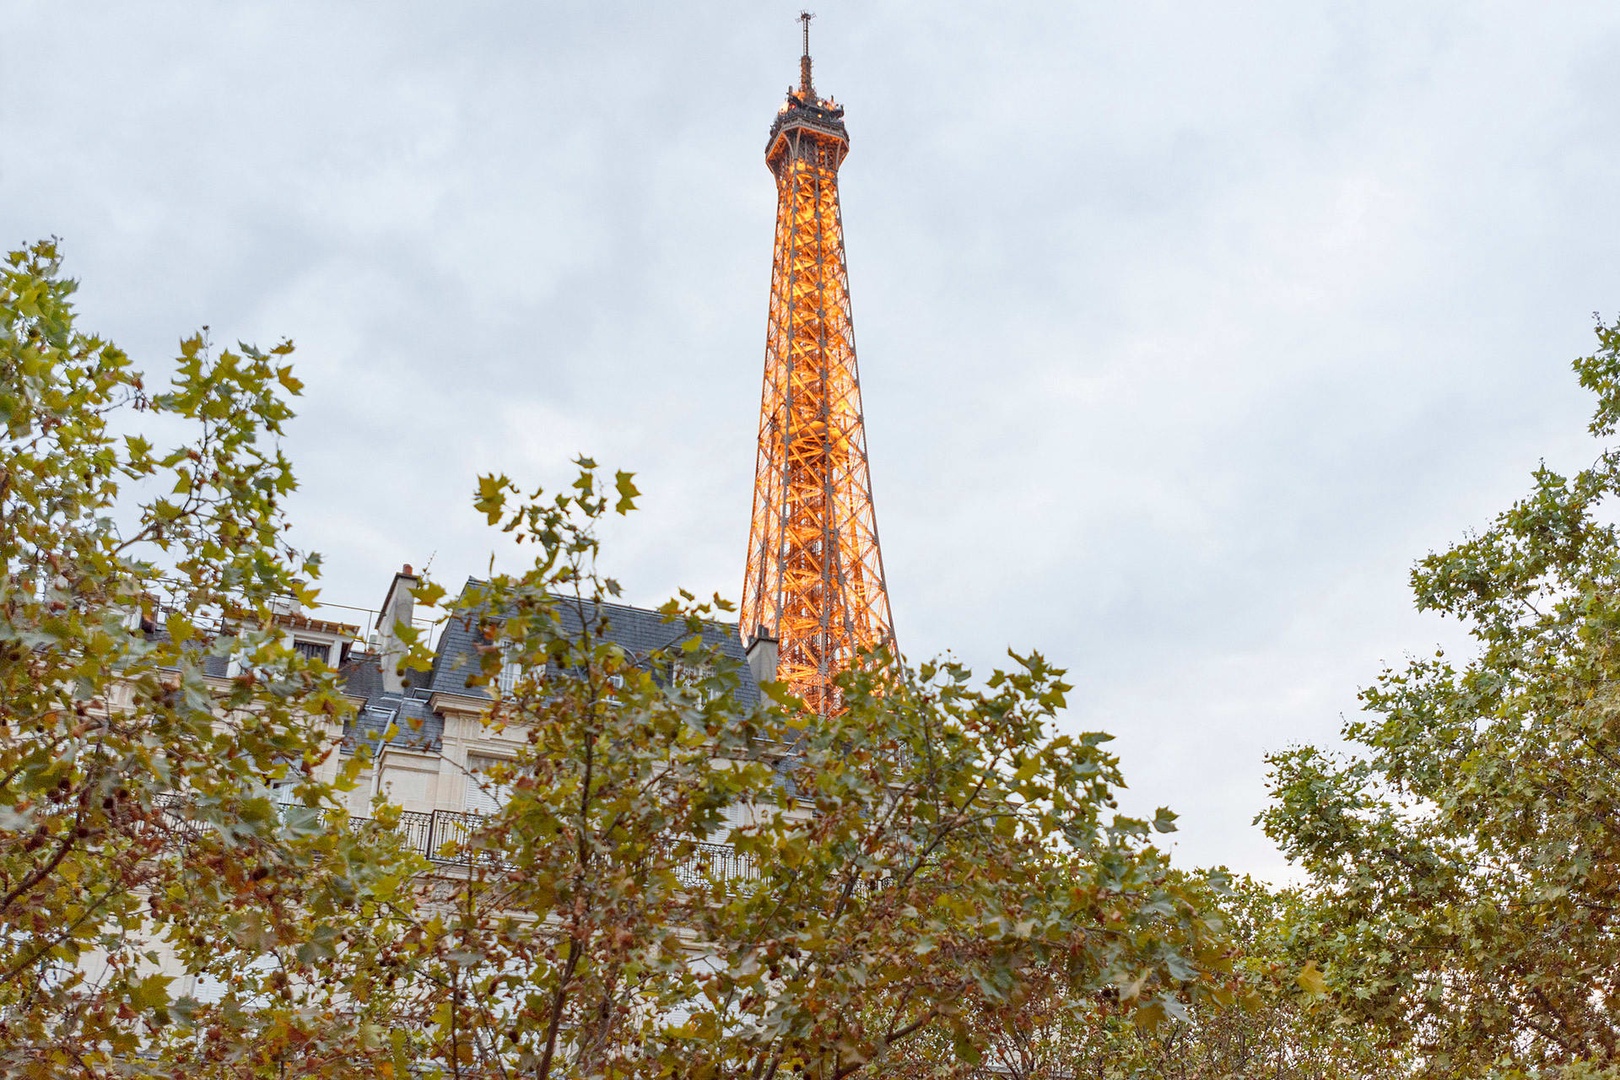 Enjoy the view of the Eiffel Tower peaking over rooftops.